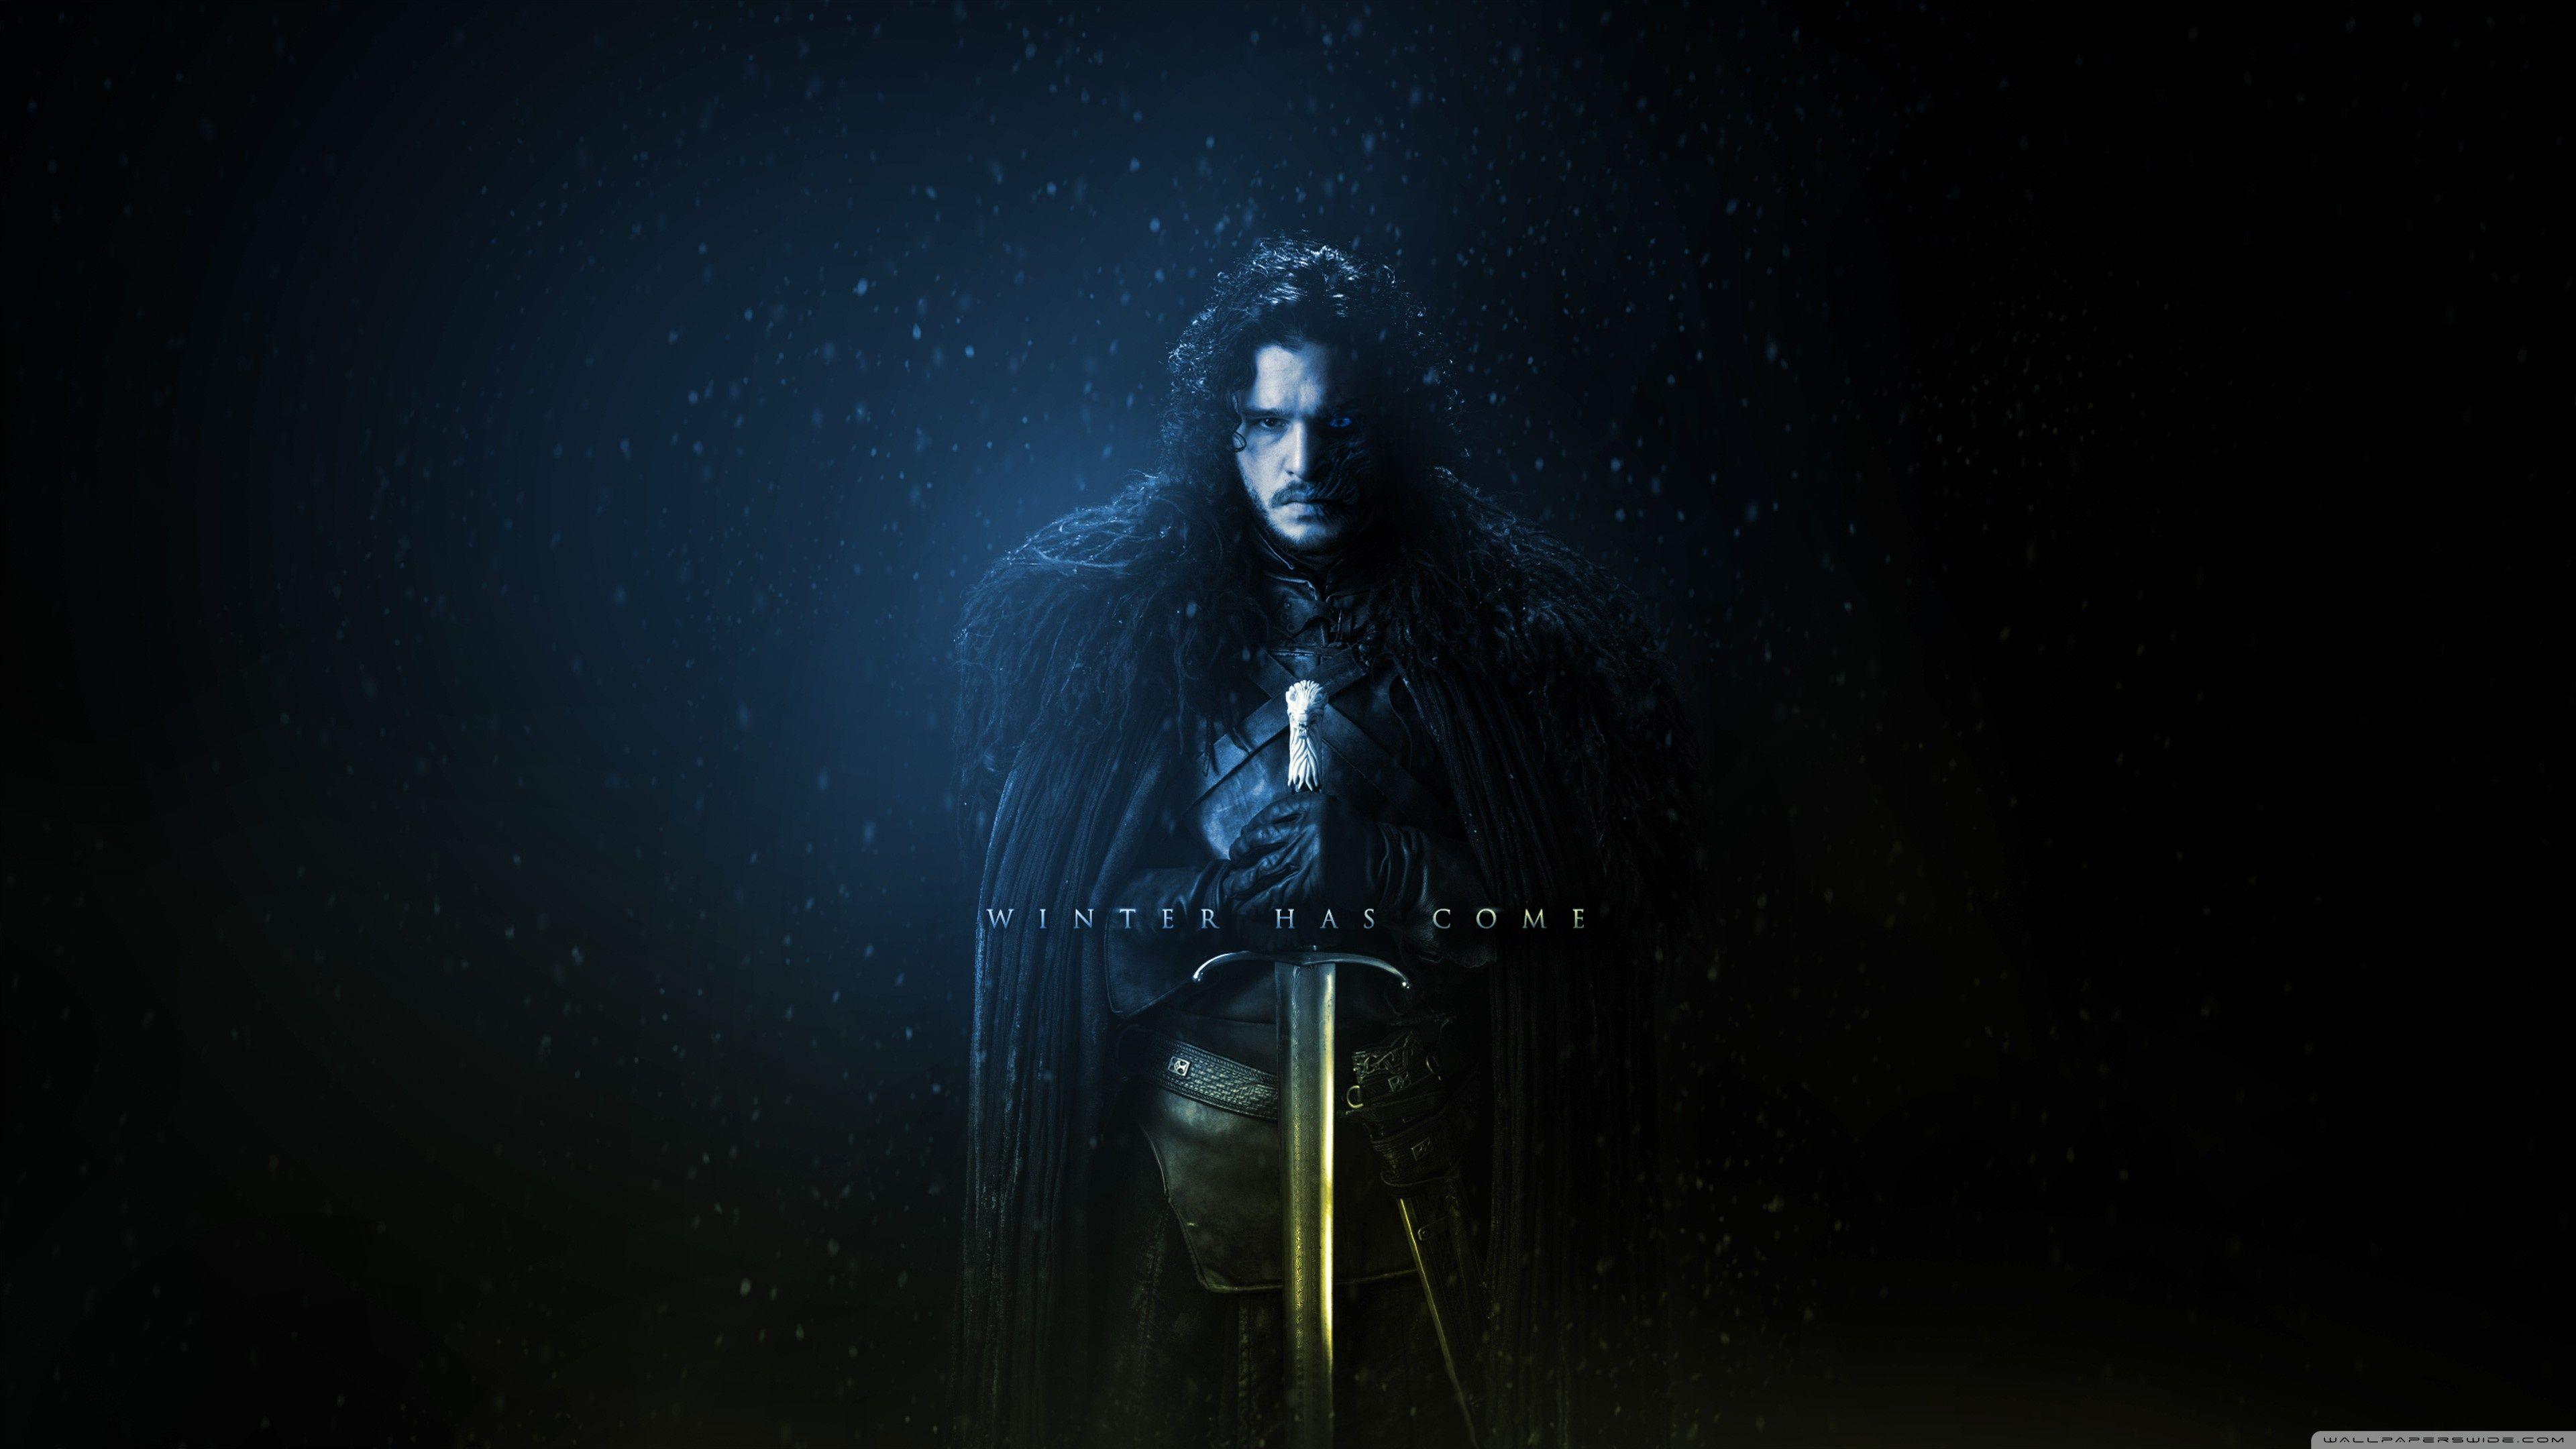 Game Of Thrones Wallpapers Top Free Game Of Thrones